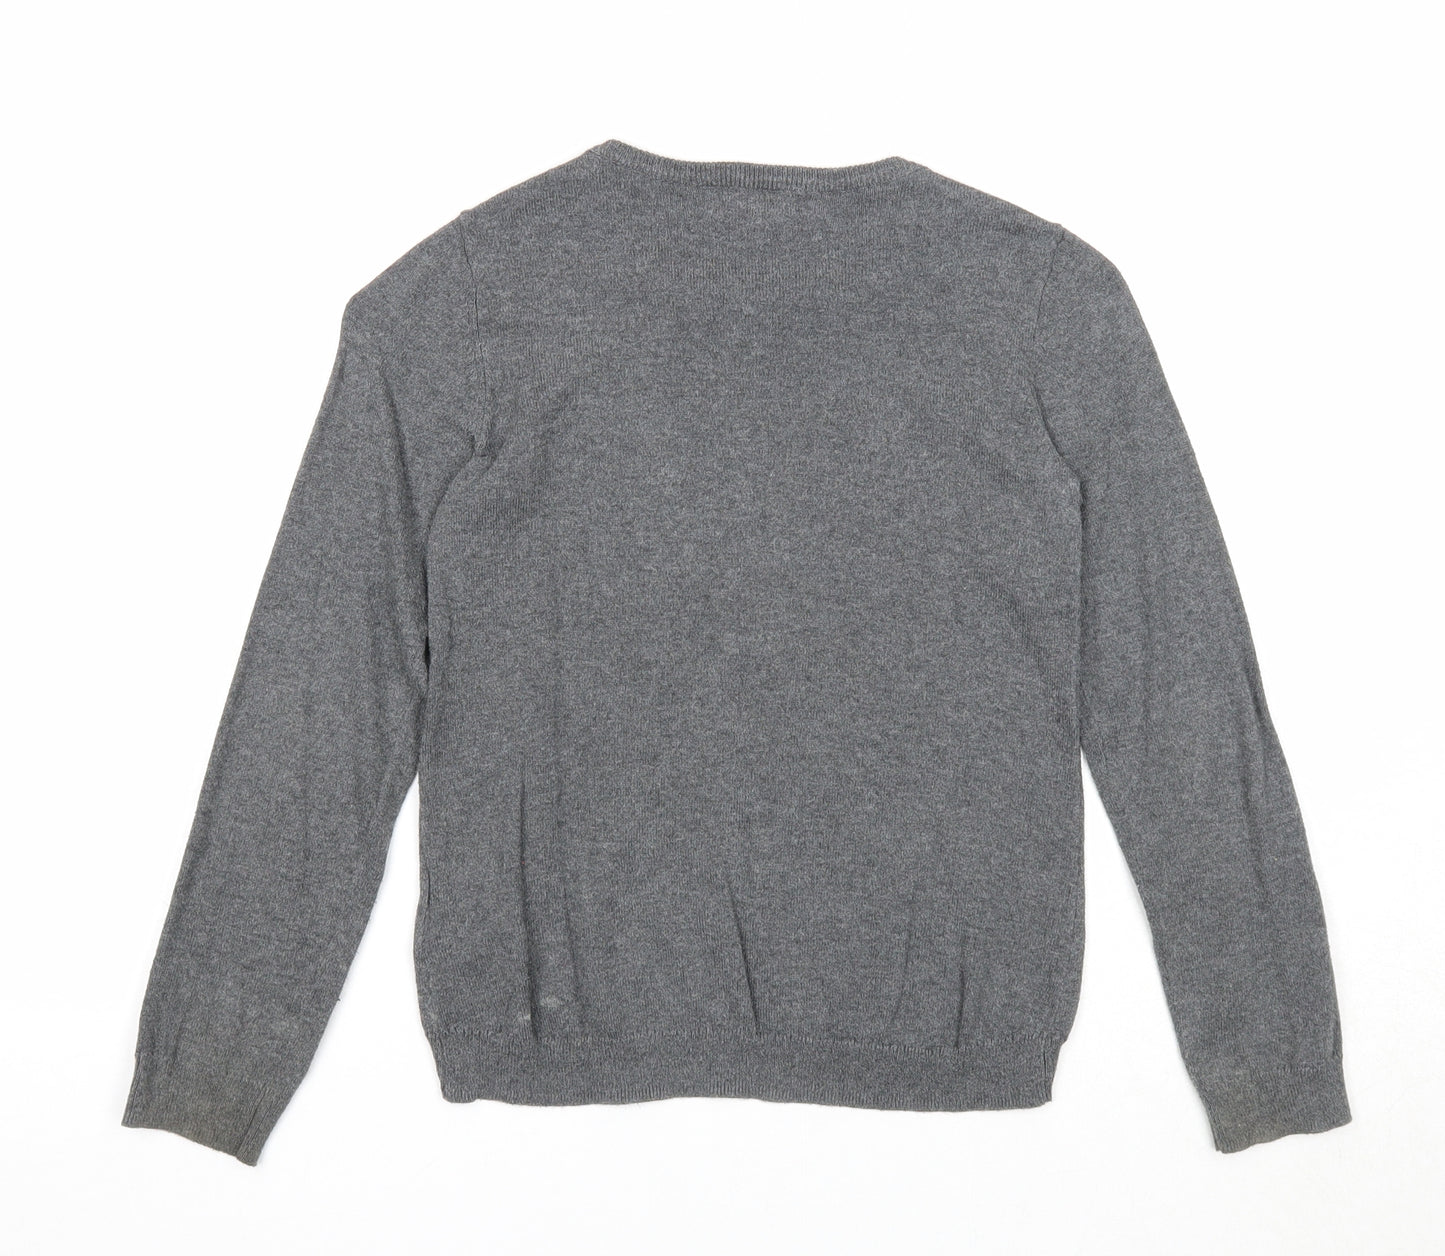 H&M Girls Grey Round Neck Cotton Pullover Jumper Size 7-8 Years Pullover - Make Your Own Magic